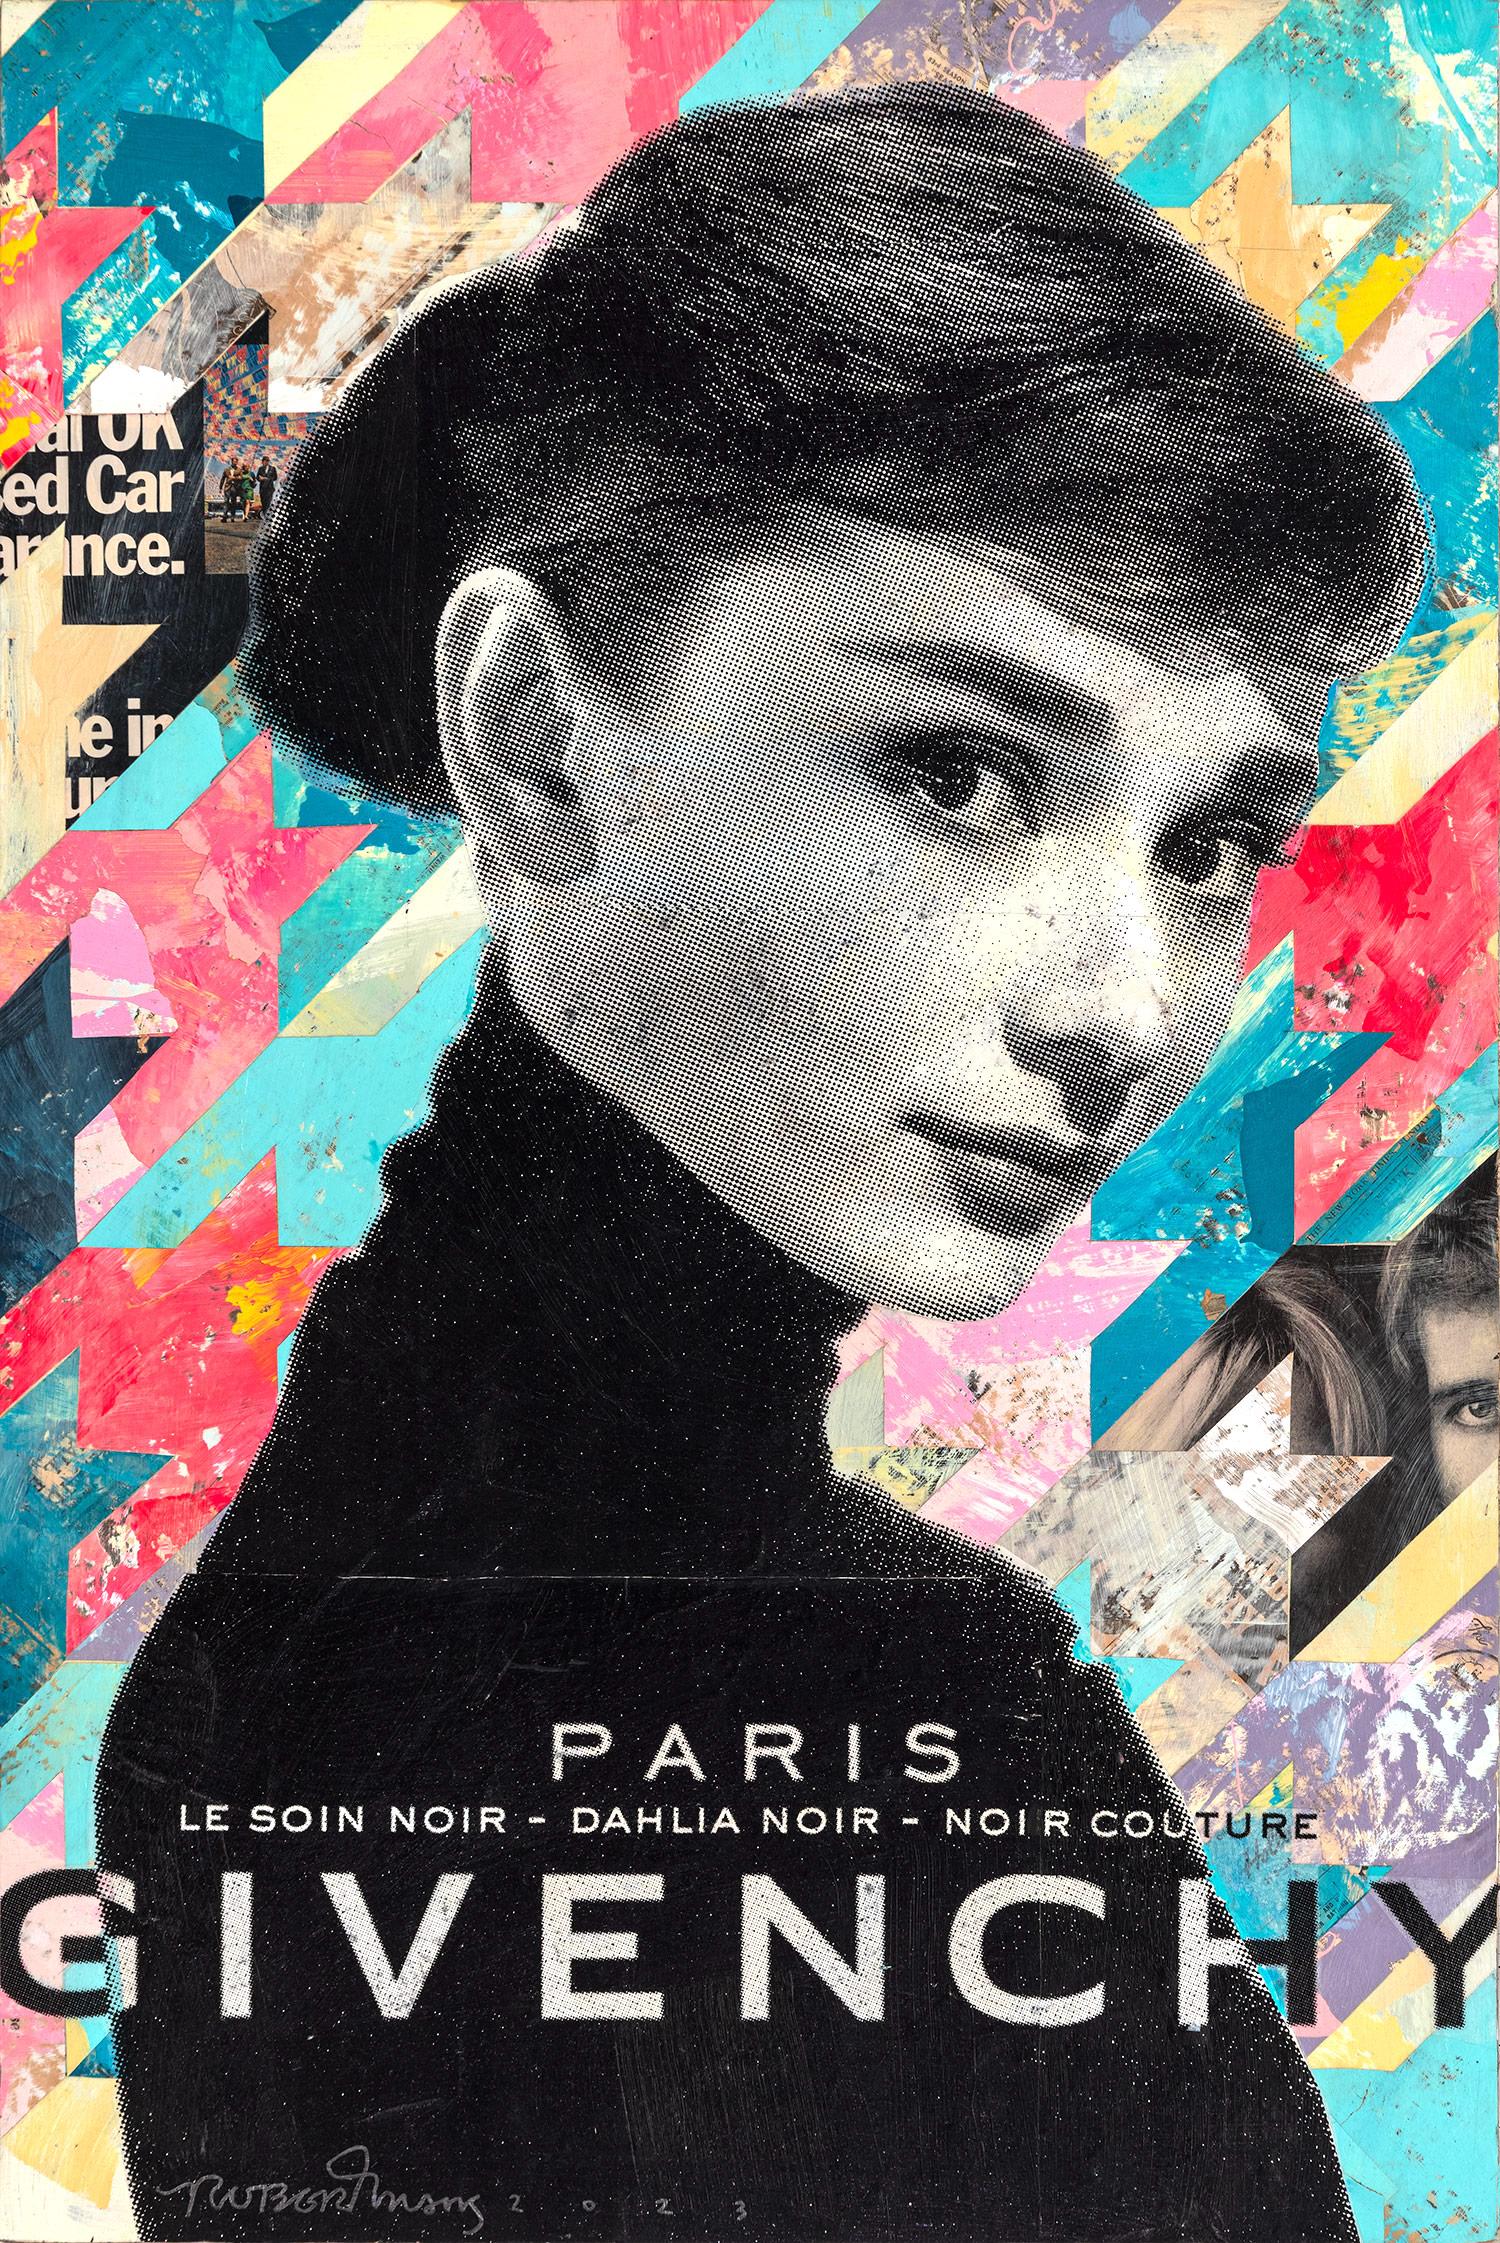 Portrait Painting Robert Mars - "Truth Be Told" Audrey Hepburn Collage Composition Painting on Panel Board